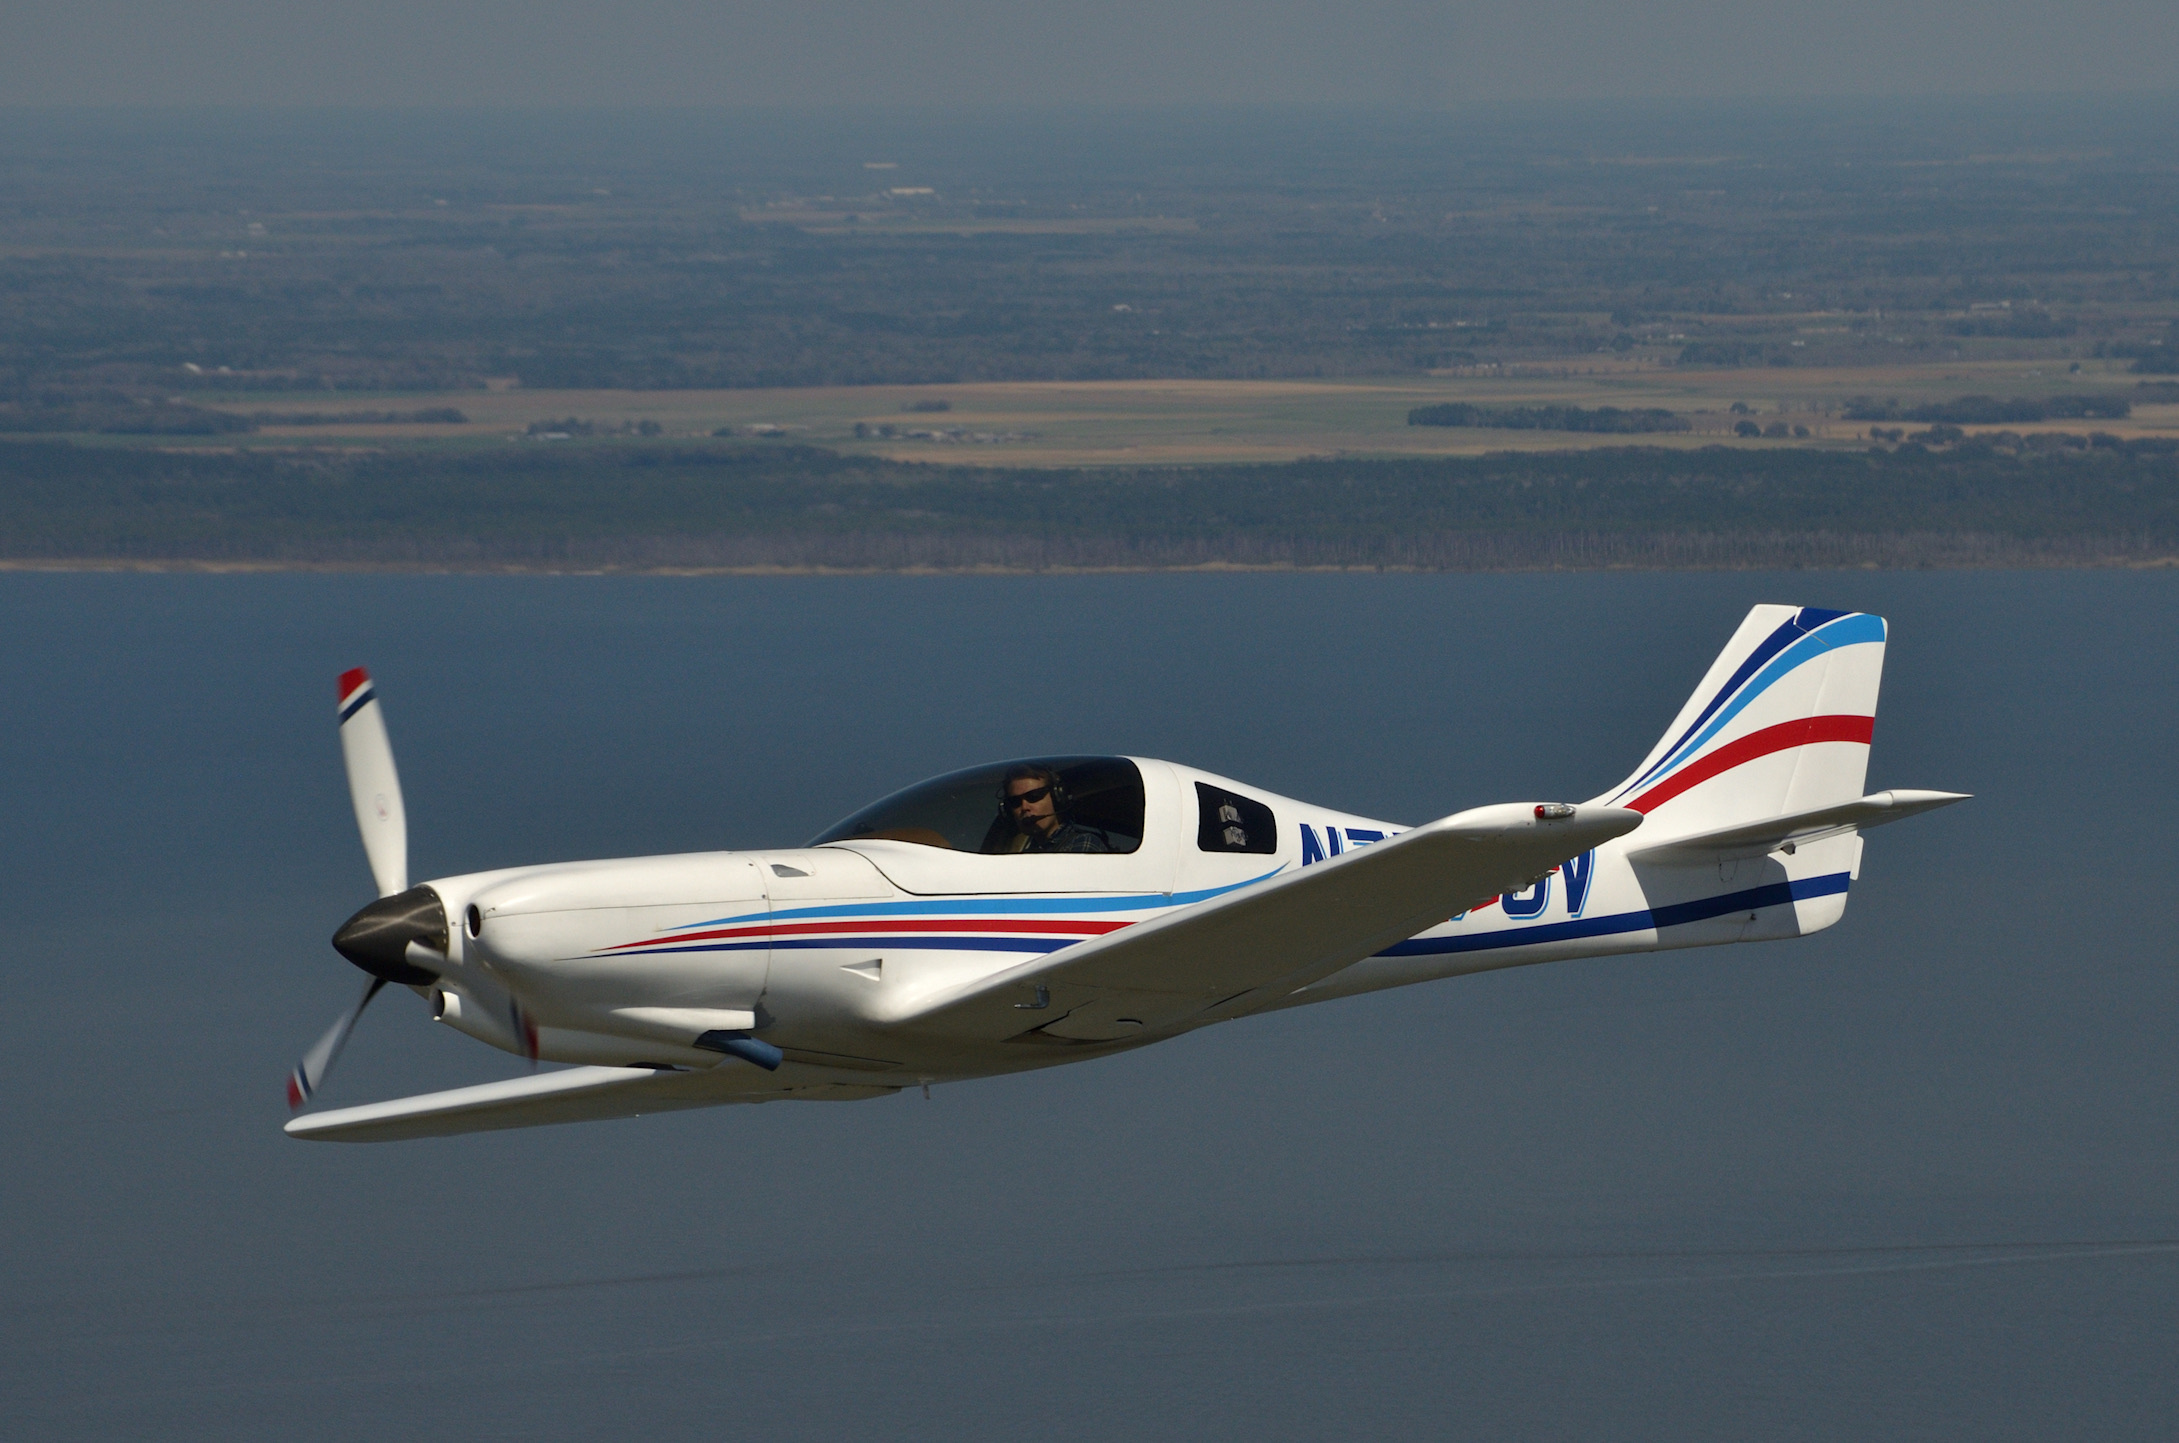 Lancair 360 for Sale N757GV for sale 2180x1450